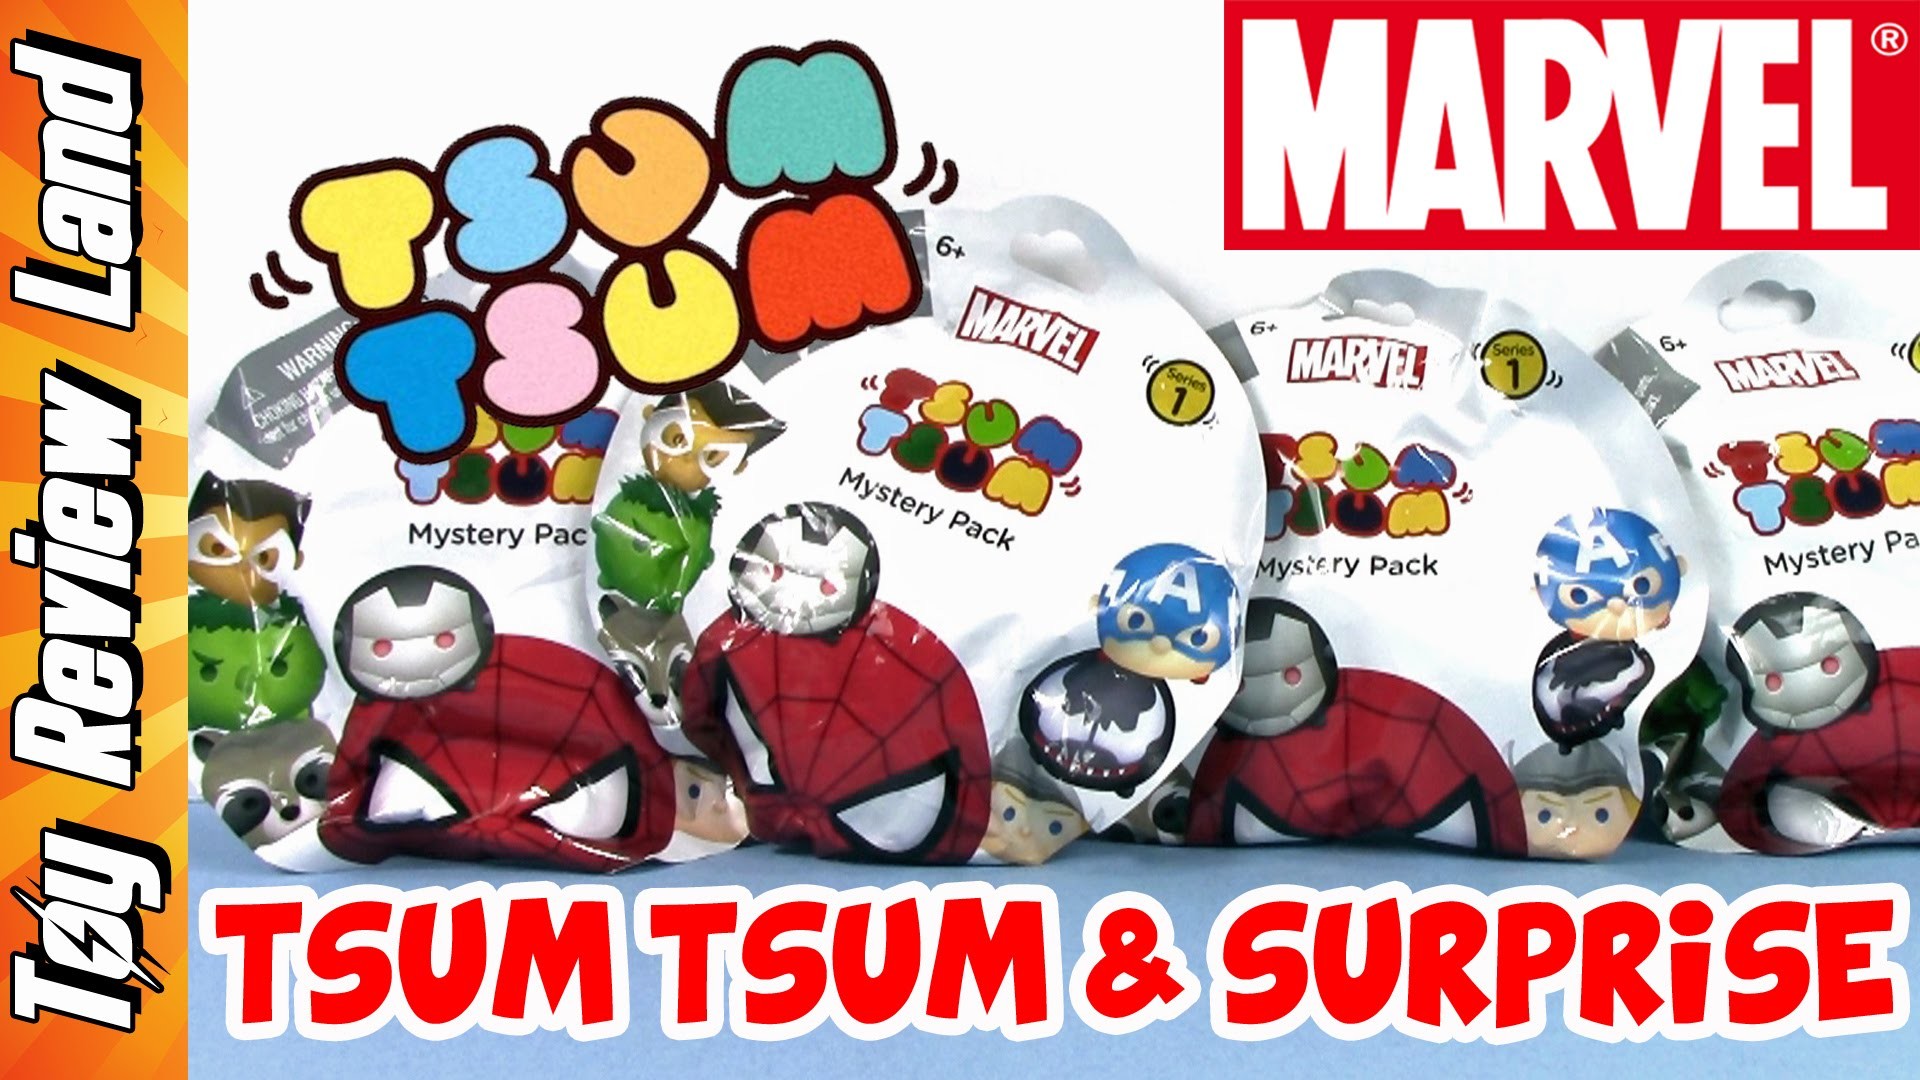 1920x1080 Marvel Tsum Tsum Series 1 Blind Bags Opening And A Secret Marvel Avengers  Surprise!